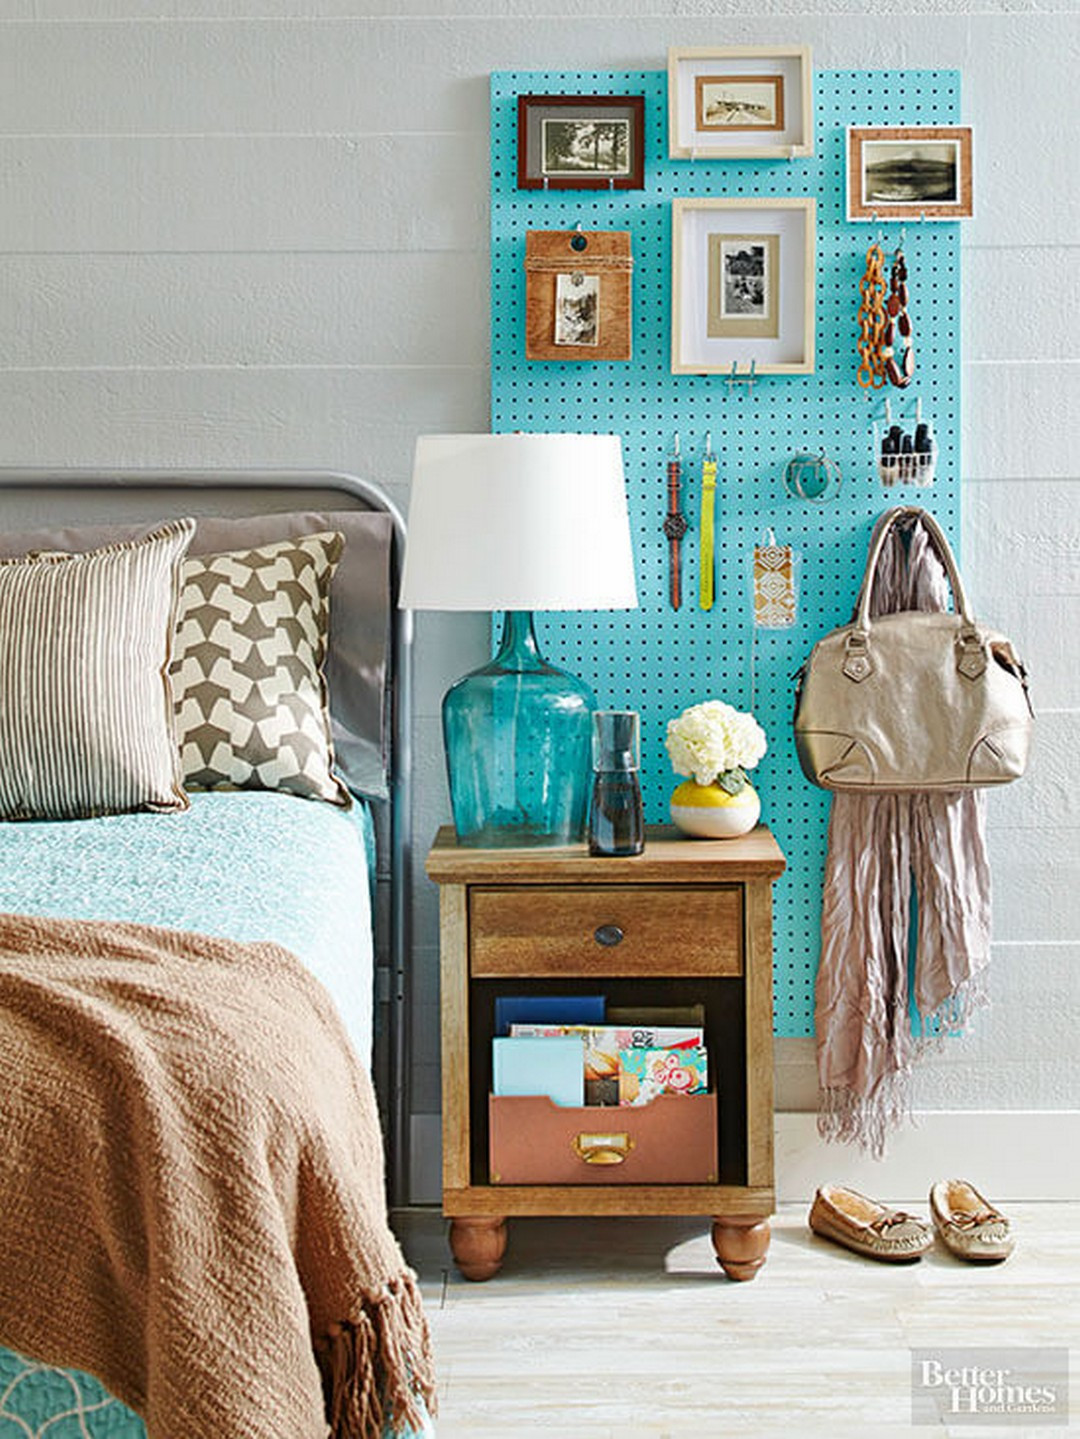 Organizing Ideas For Bedroom
 38 Smart Bedroom Organization Ideas A Great Way To